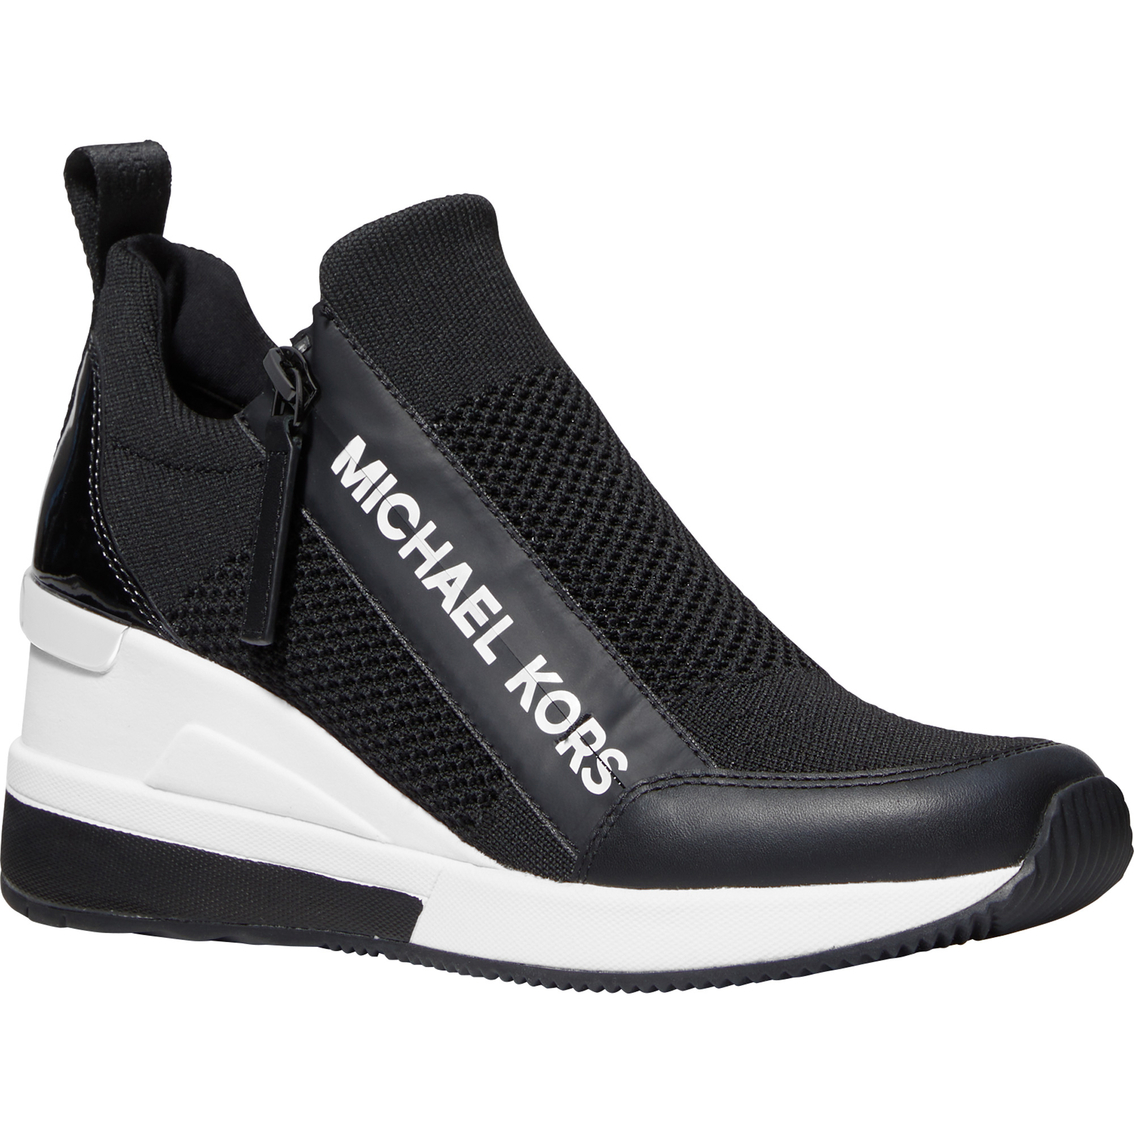 Michael Kors Willis Wedge Trainer Shoes | Sneakers | Shoes | Shop The ...